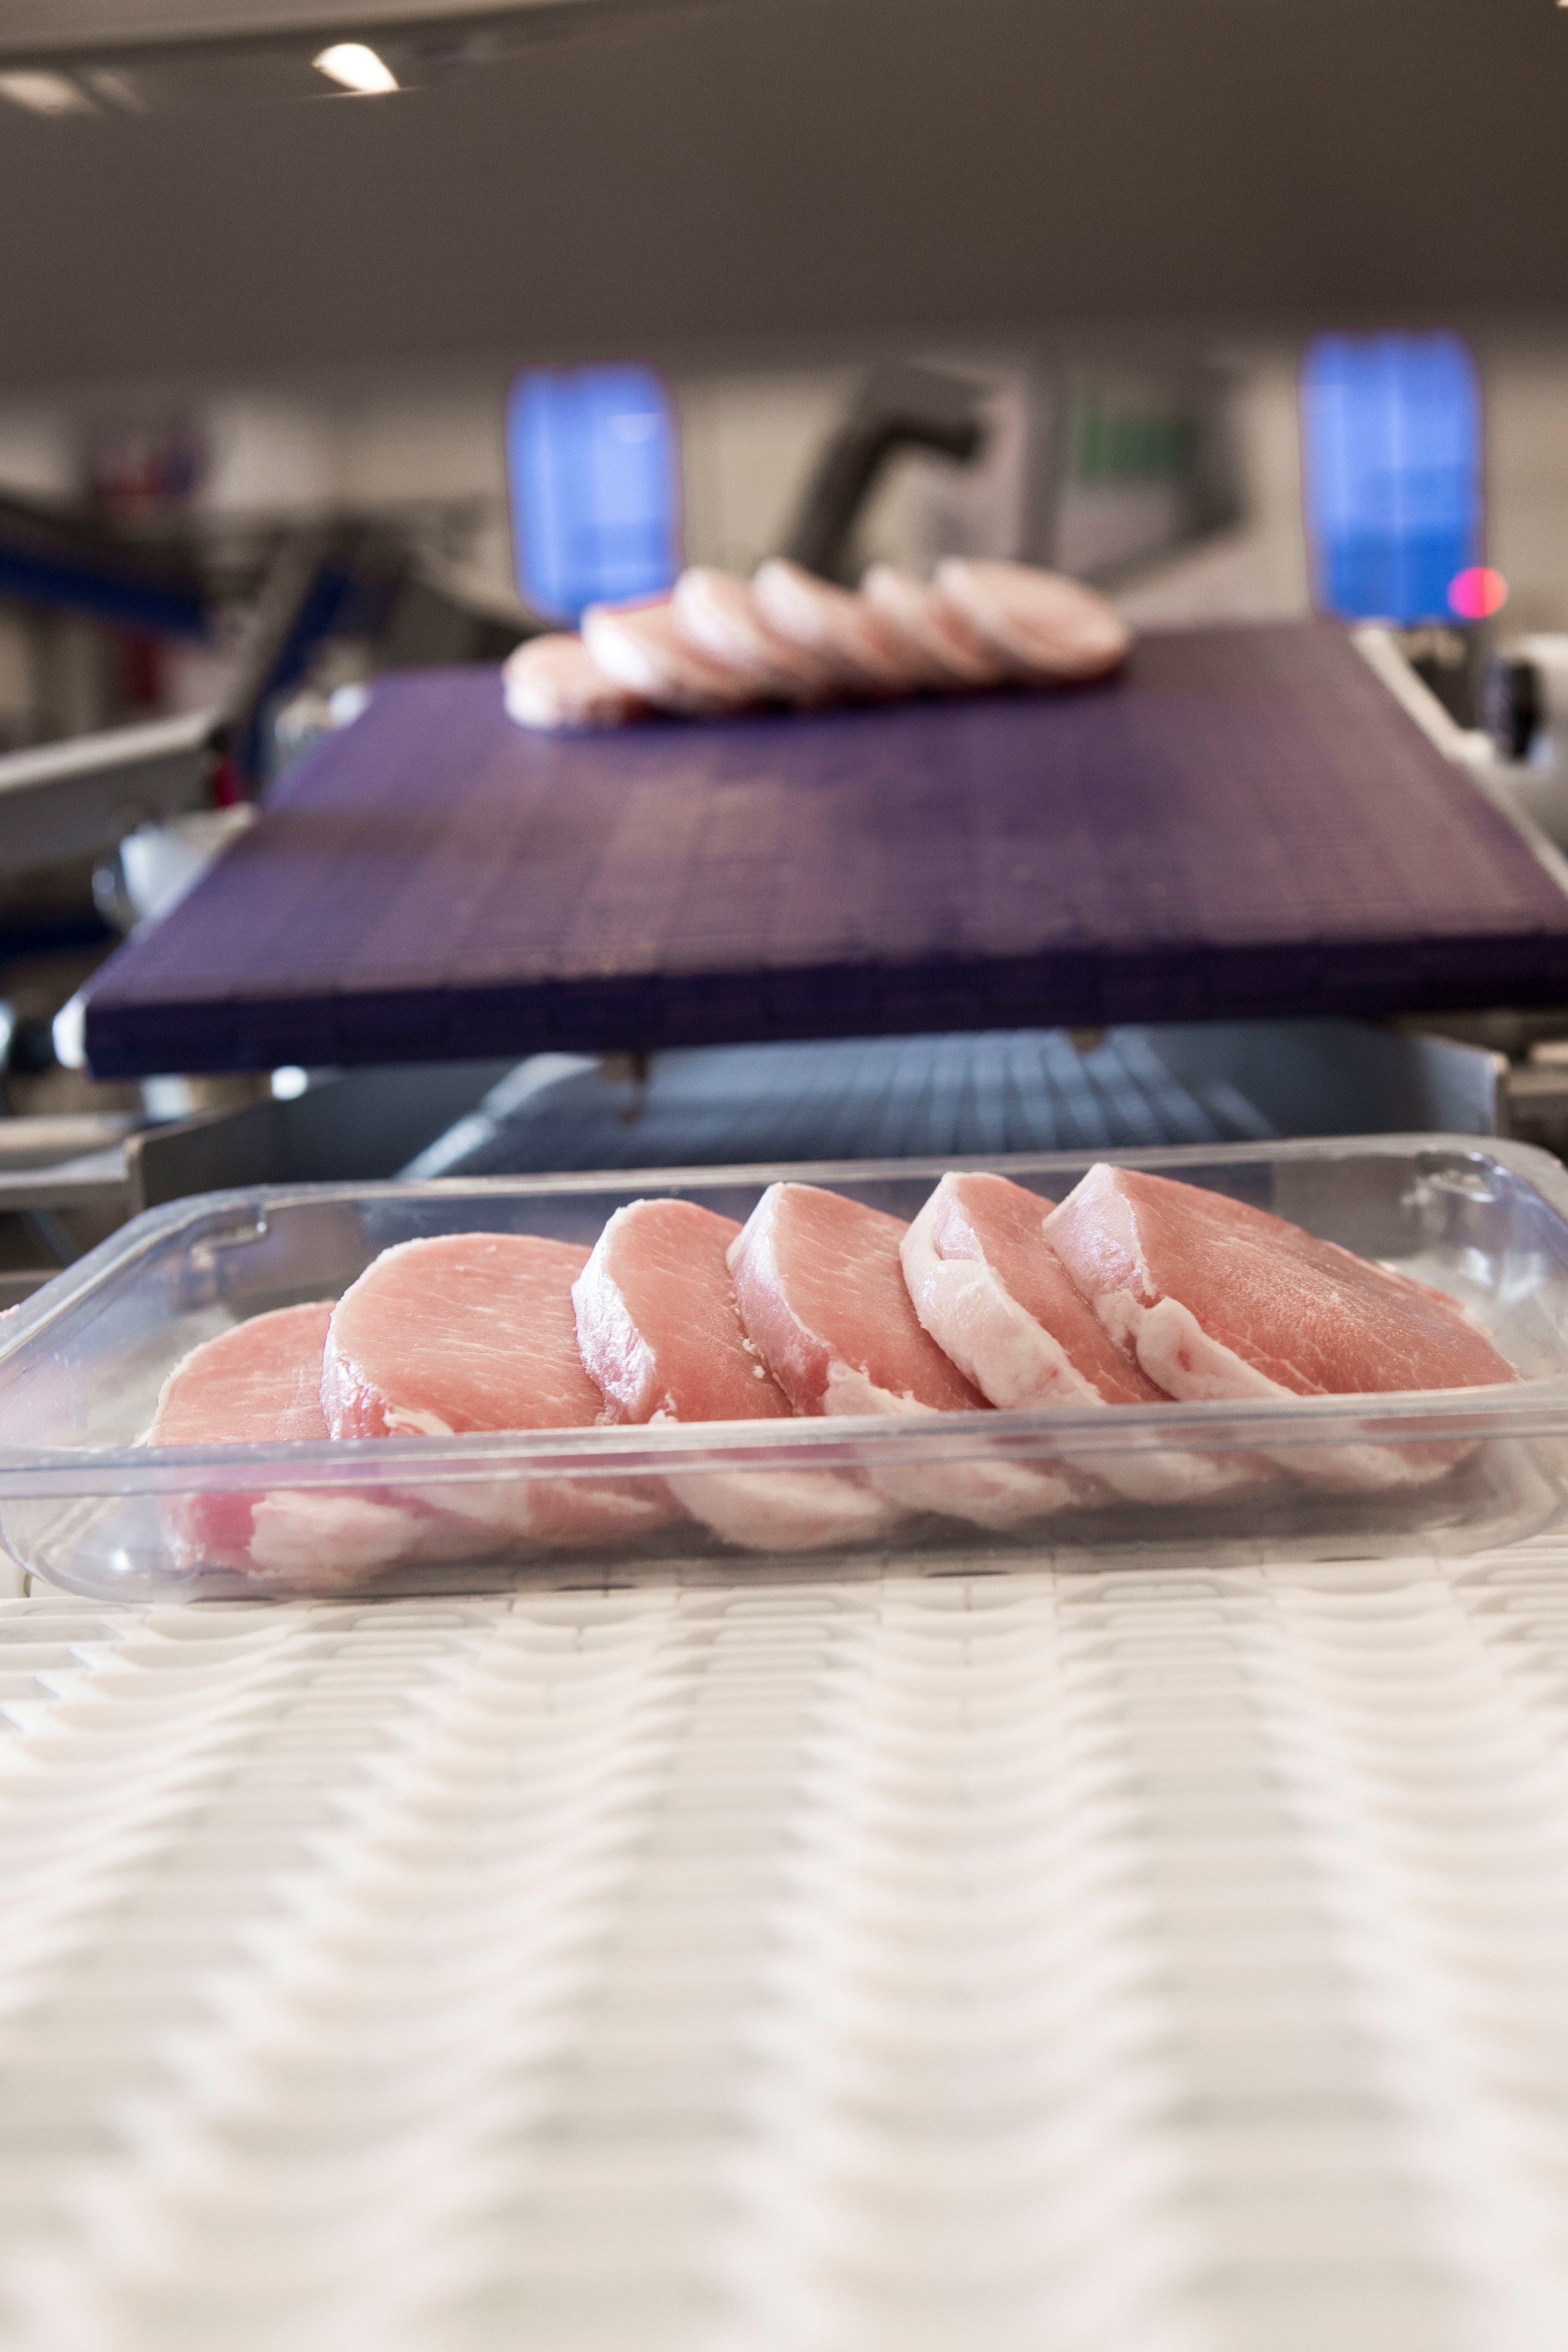 Marel's portioning equipment has been key to helping meat processors adapt to a new retail-focused reality during the Covid-19 pandemic